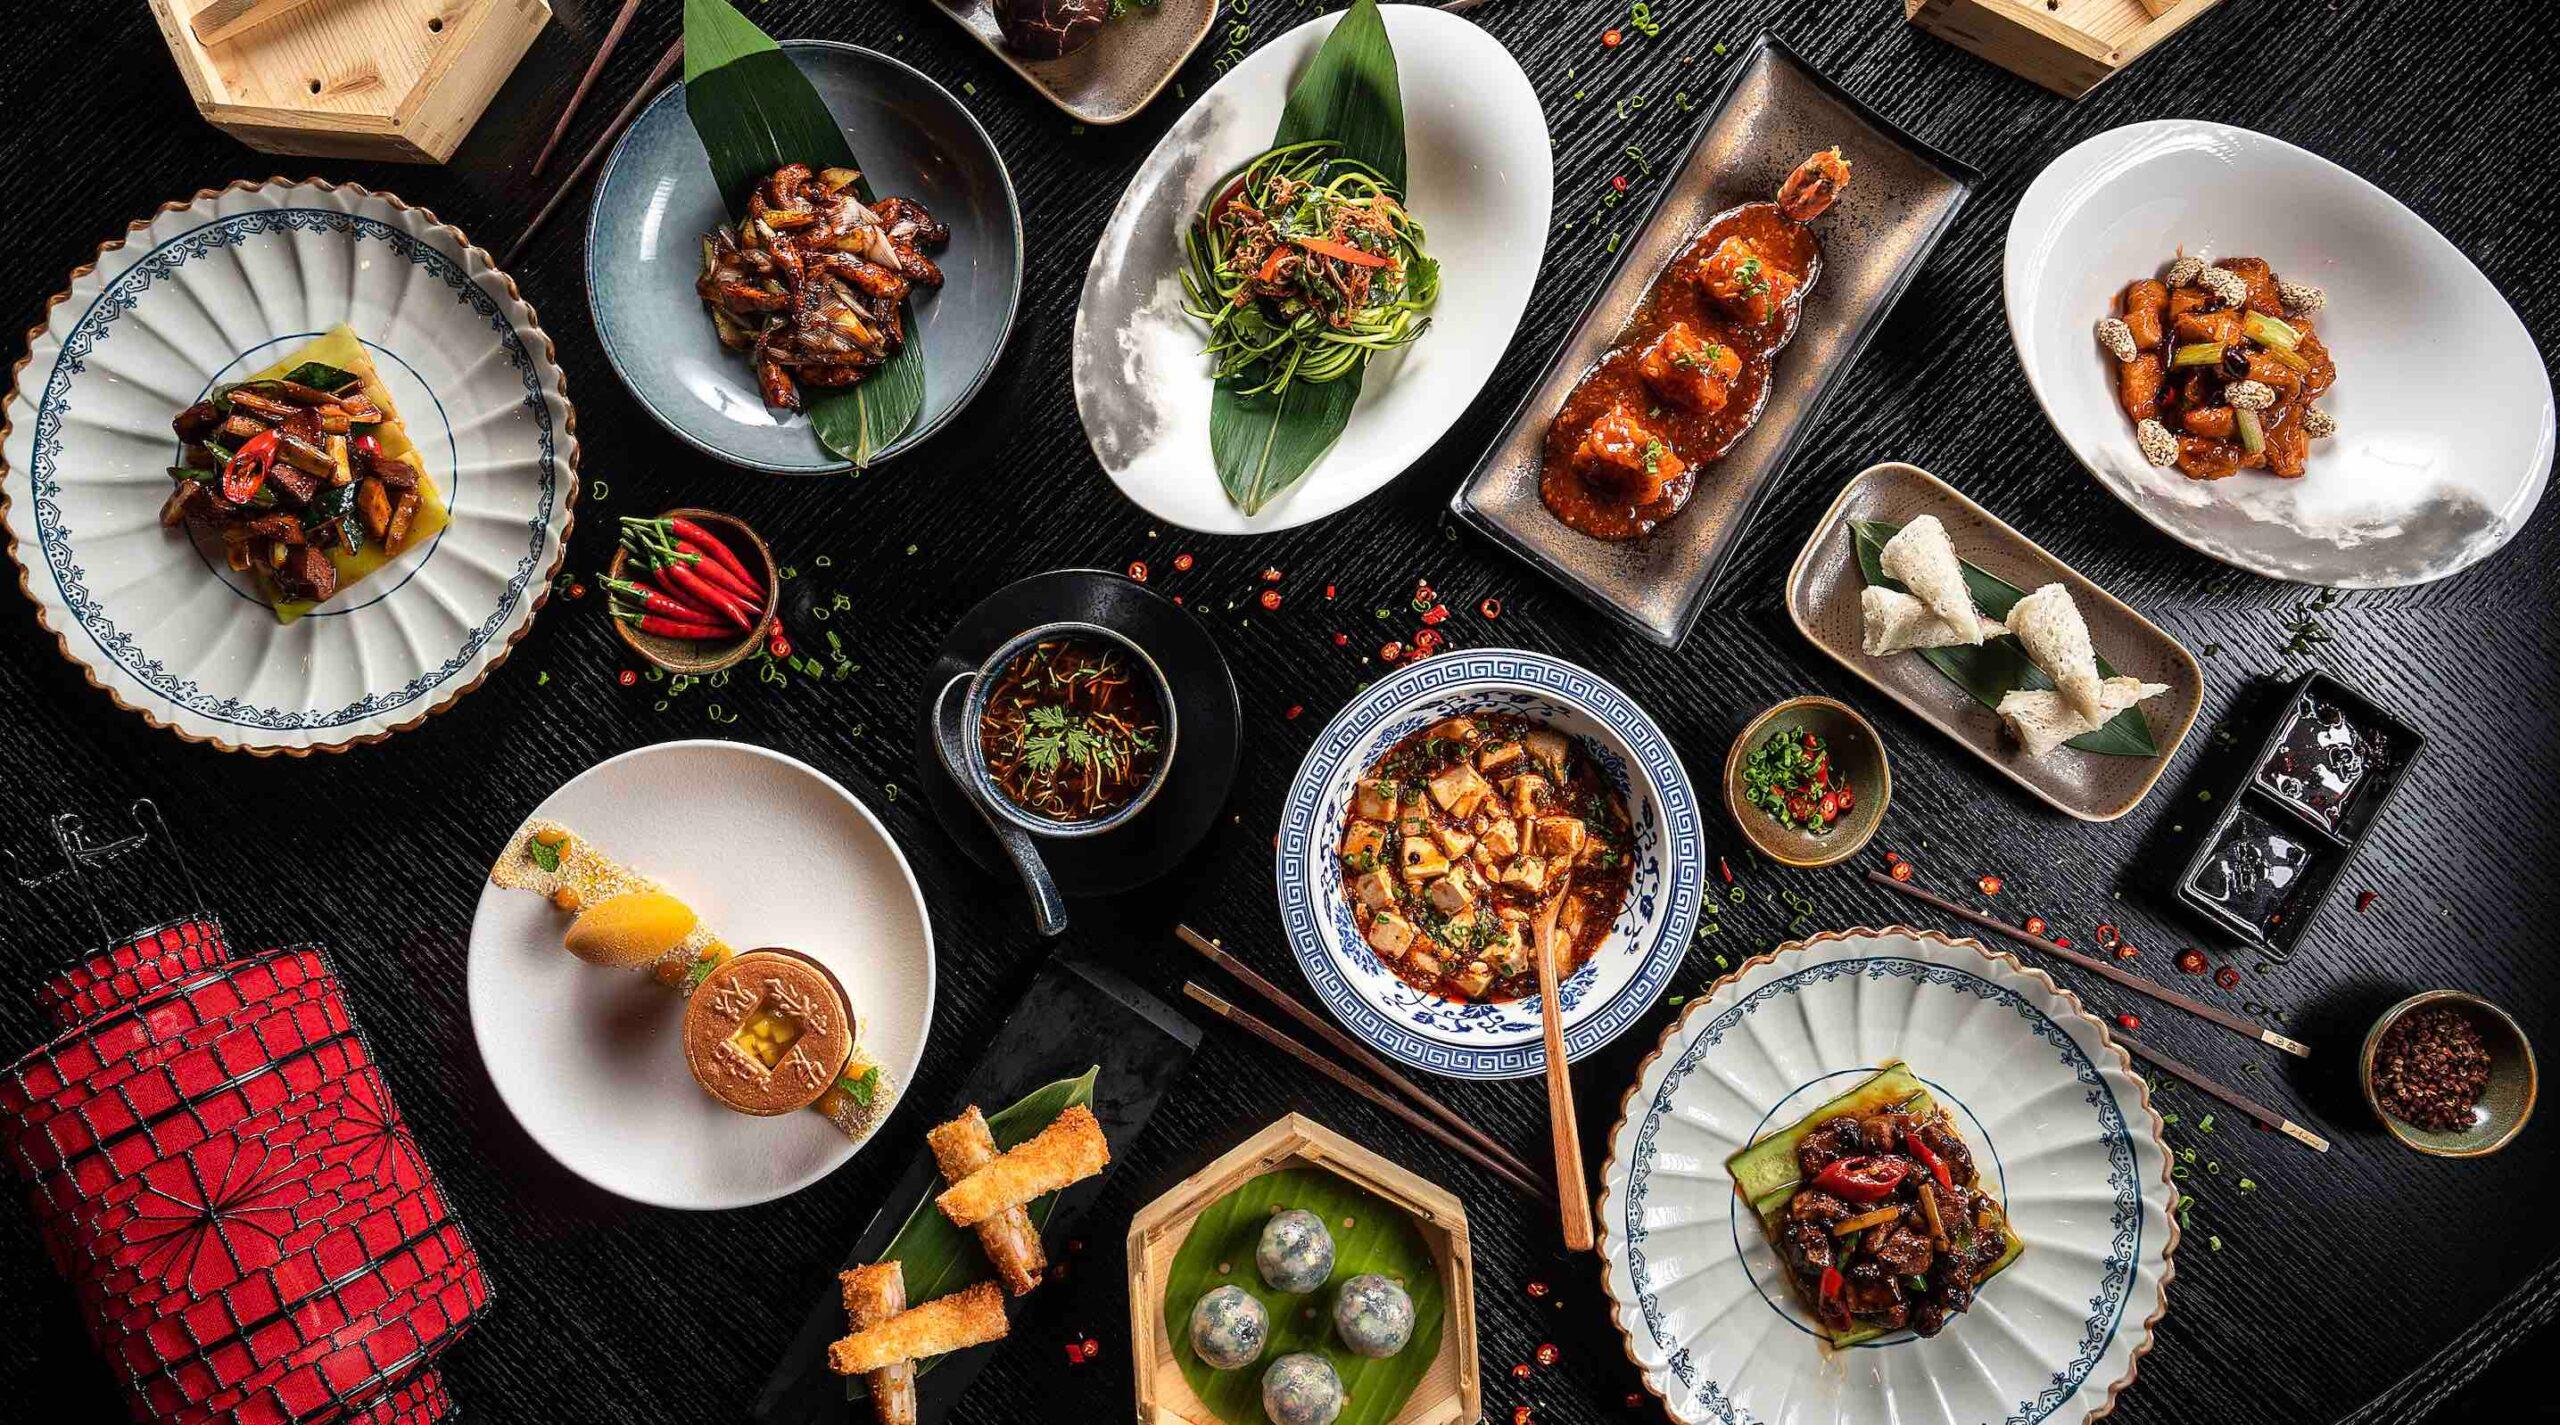 Dubai Restaurant Week: The most delectable deals to book